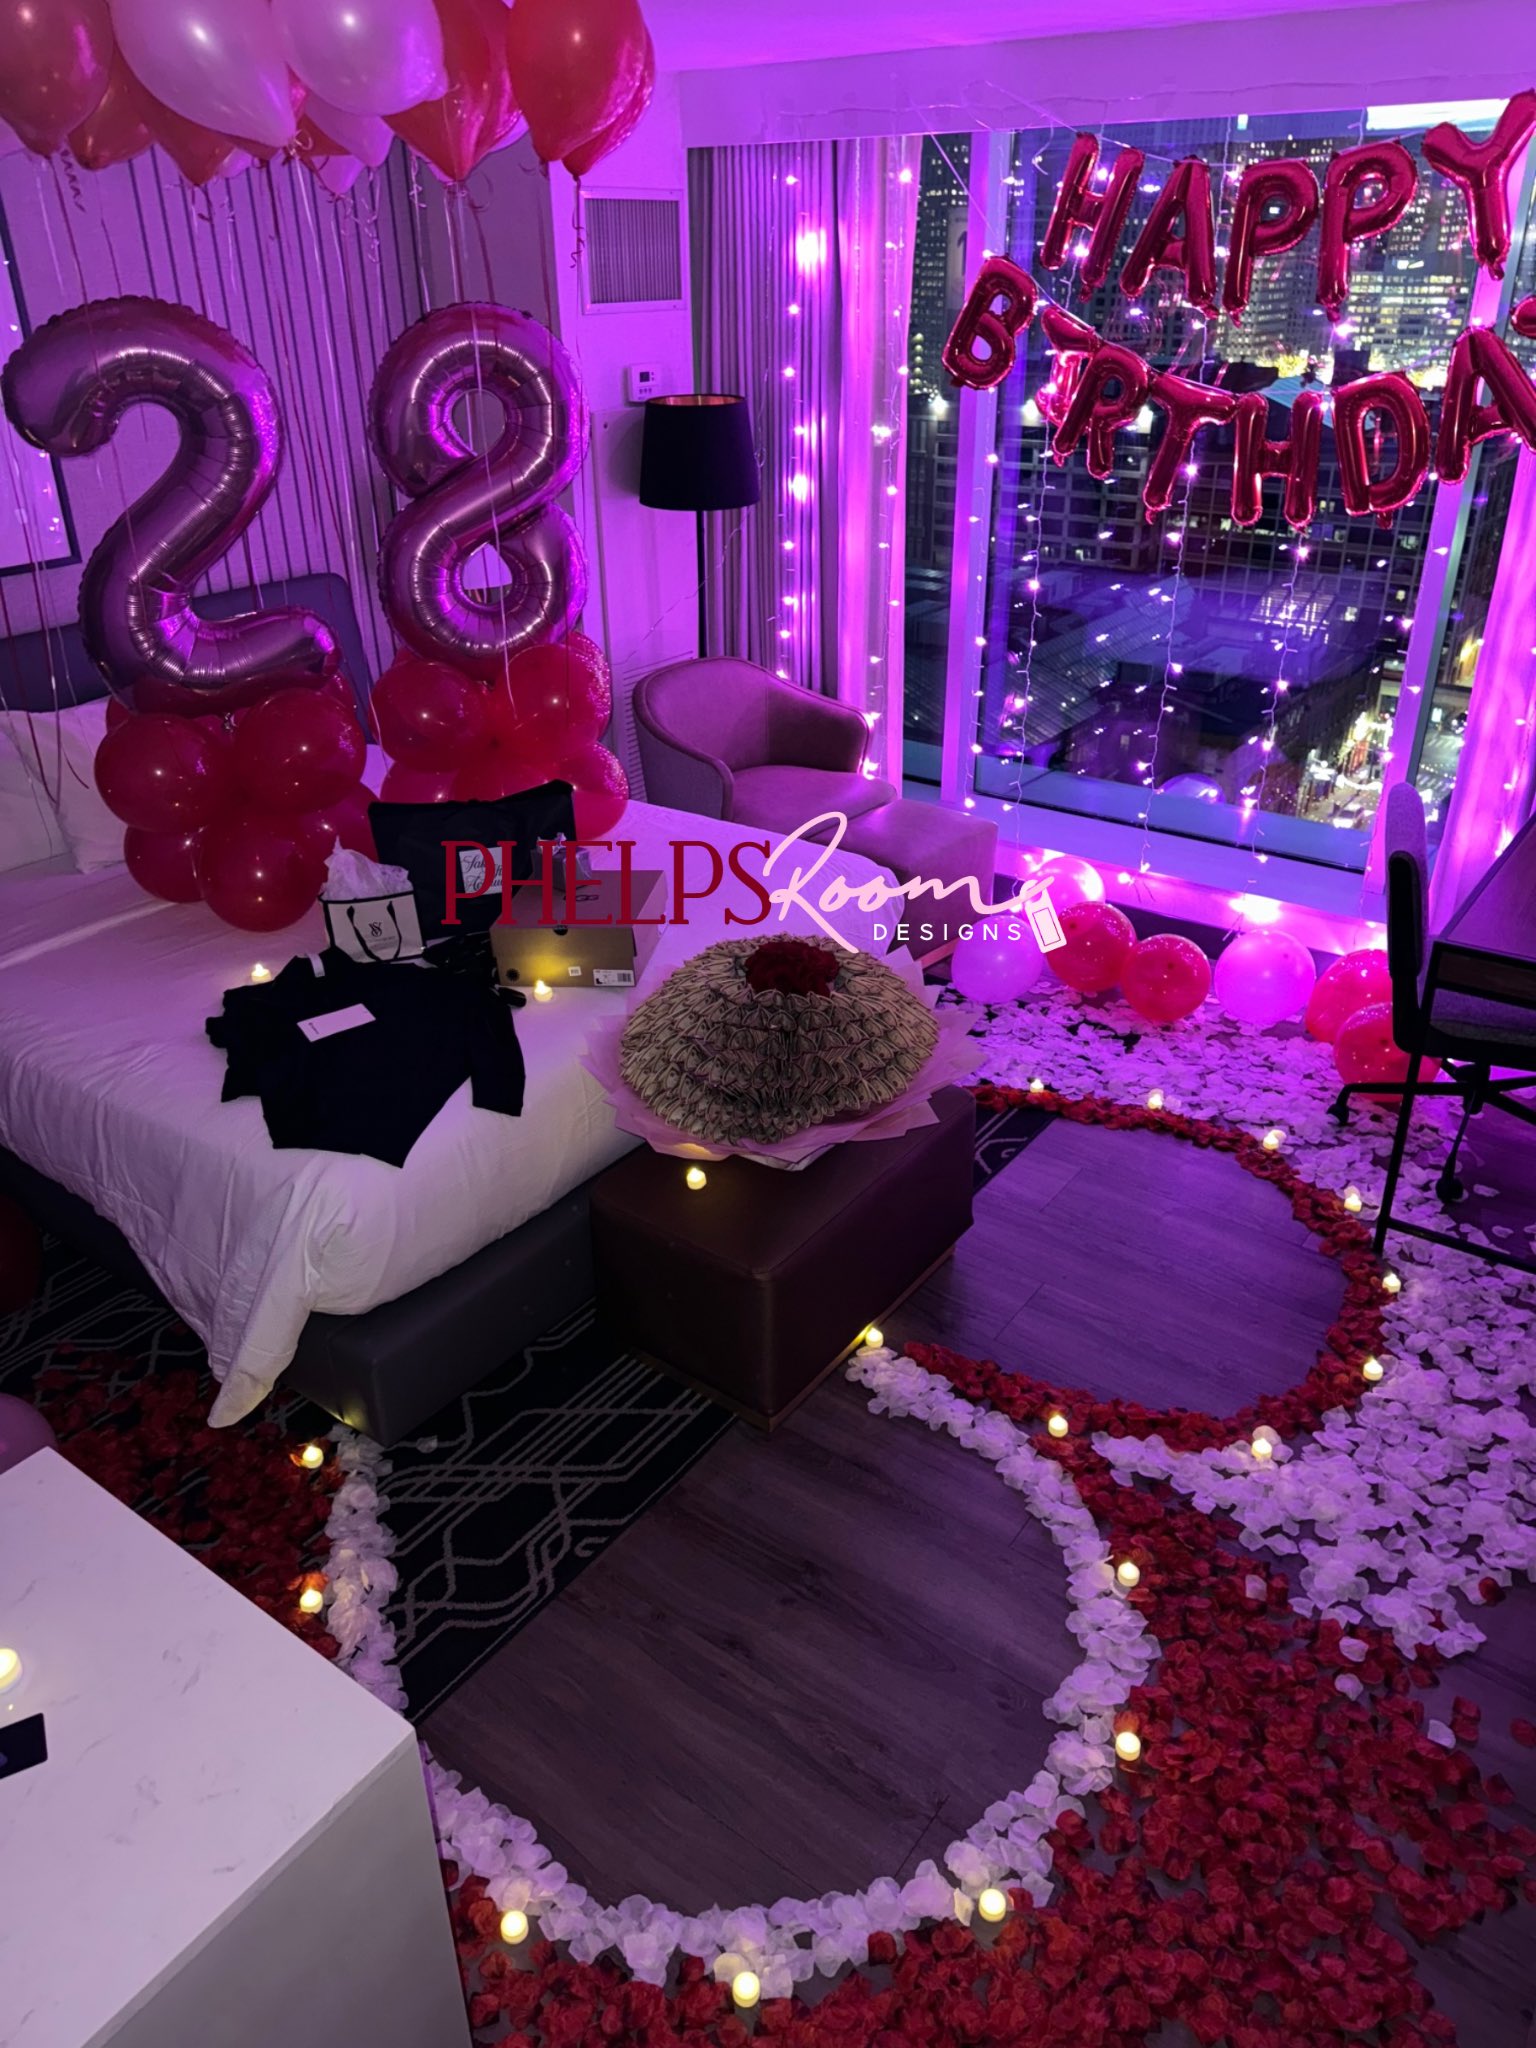 Will you be my girlfriend and Happy - Phelps Room Designs